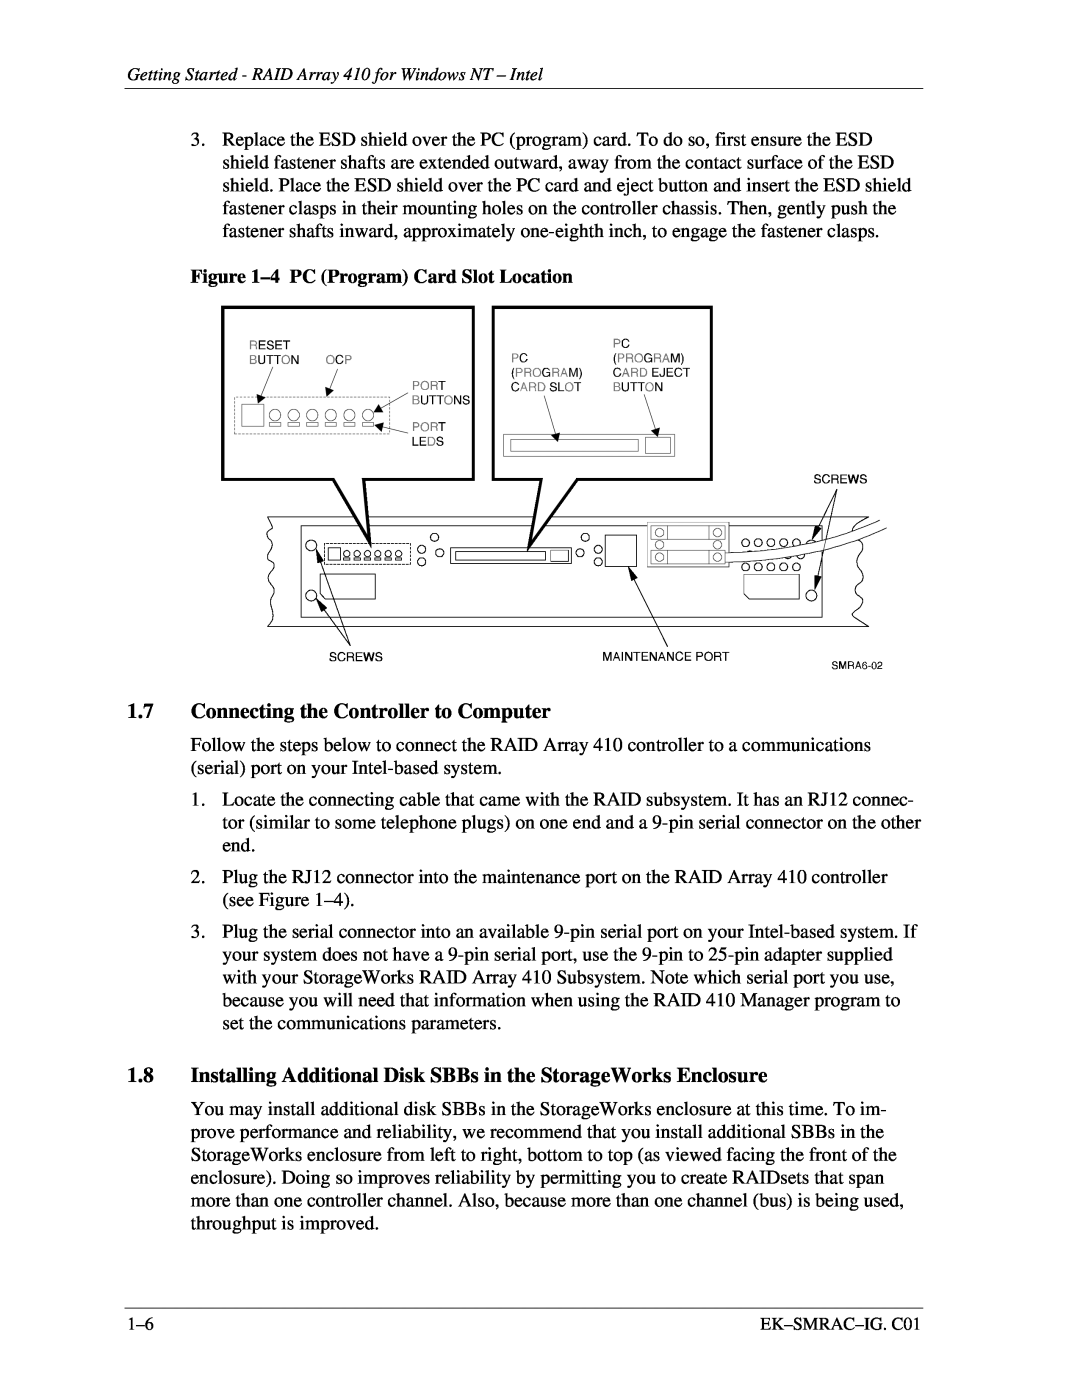 Intel 410 manual 1.7Connecting the Controller to Computer, 4PC Program Card Slot Location 